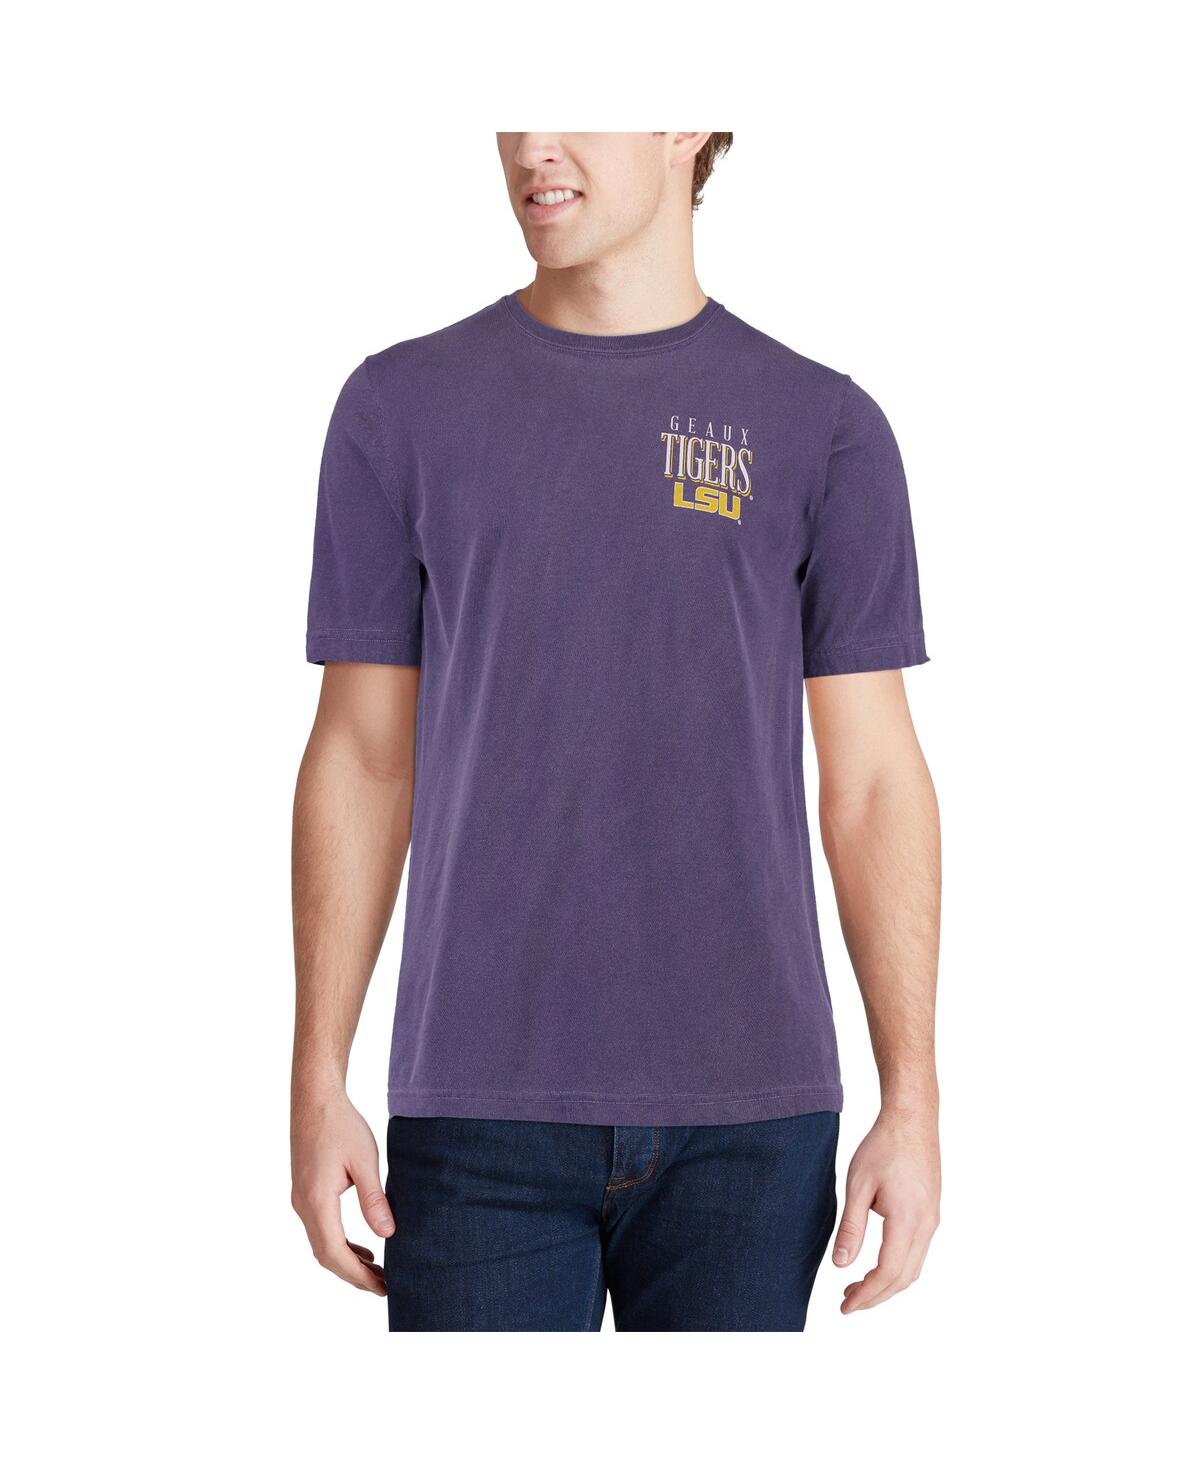 Shop Image One Men's Purple Lsu Tigers Welcome To The South Comfort Colors T-shirt